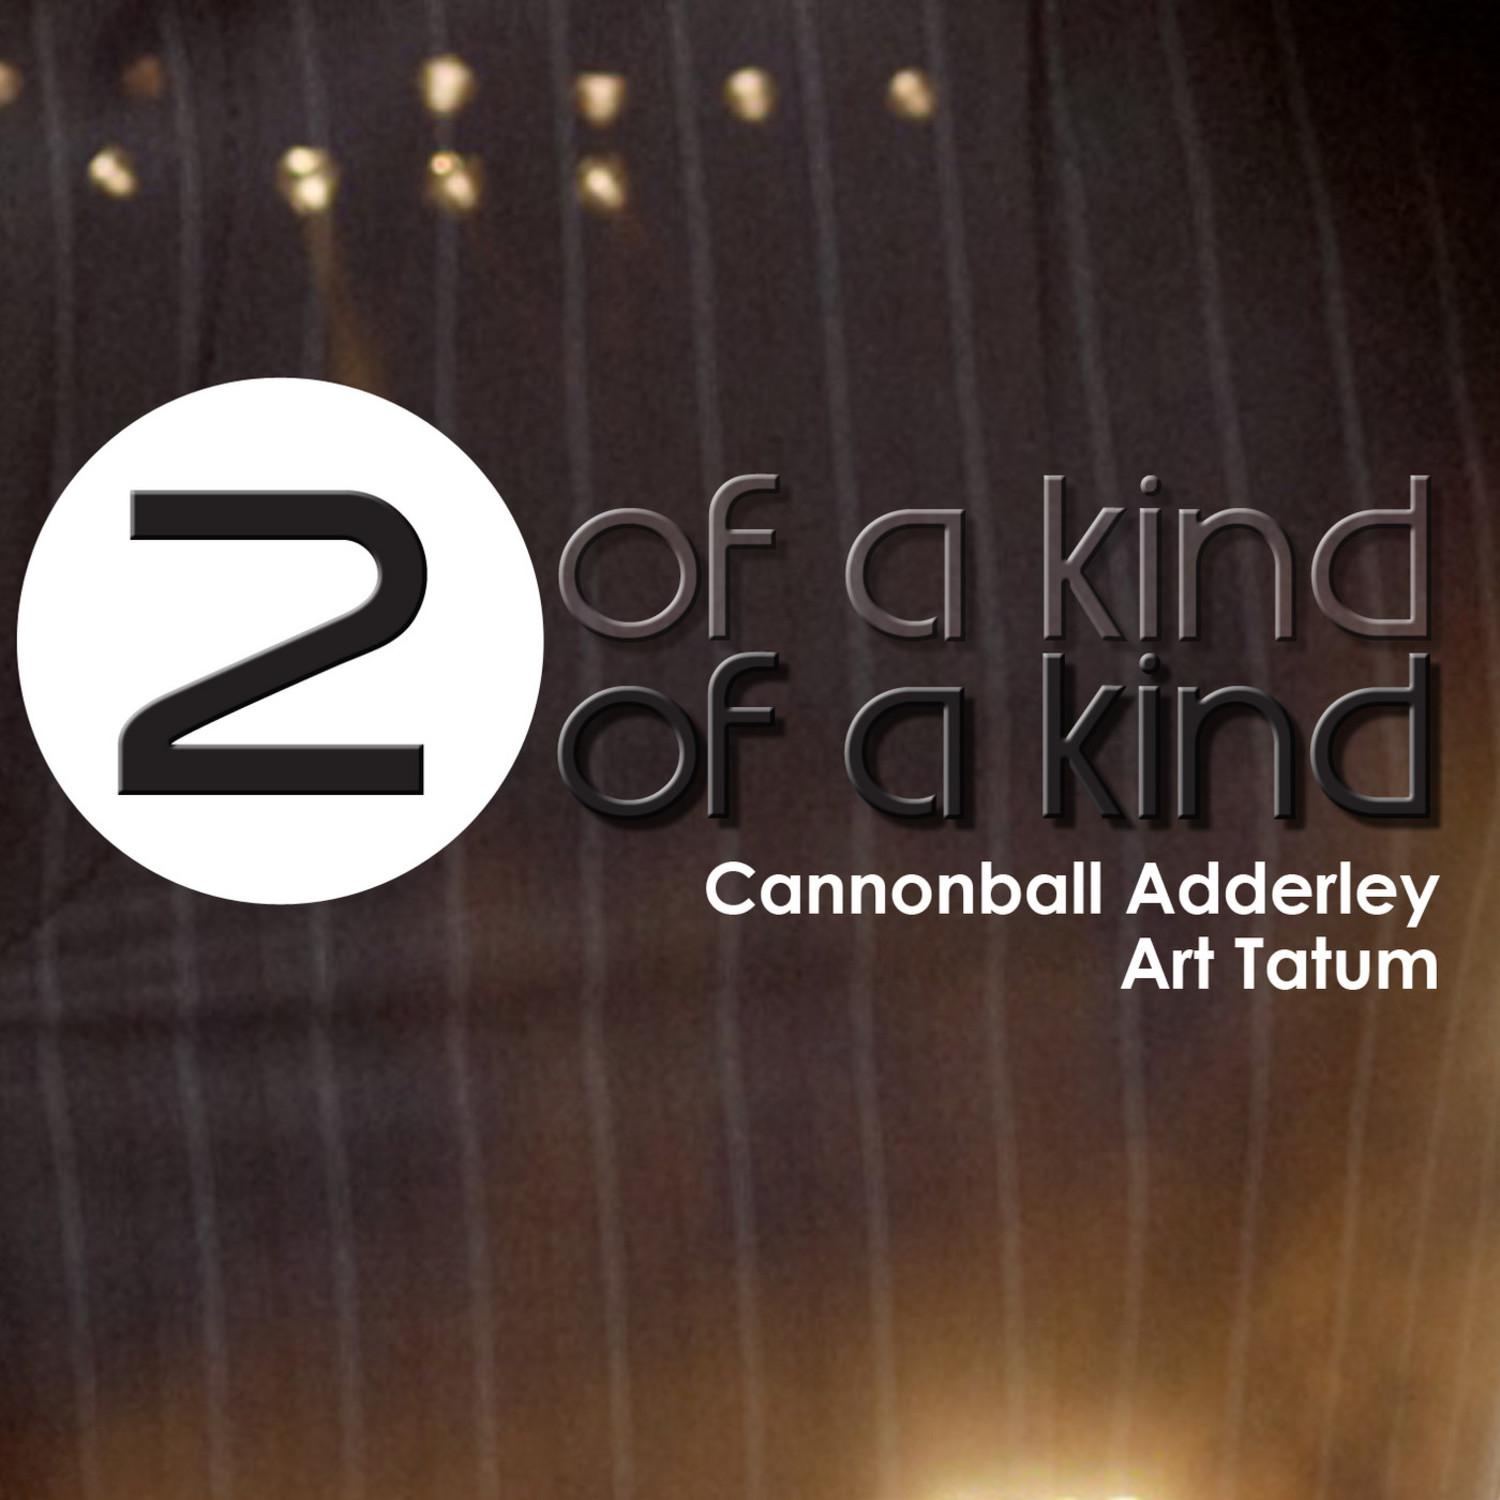 Two of a Kind - Cannonball Adderley and Art Tatum